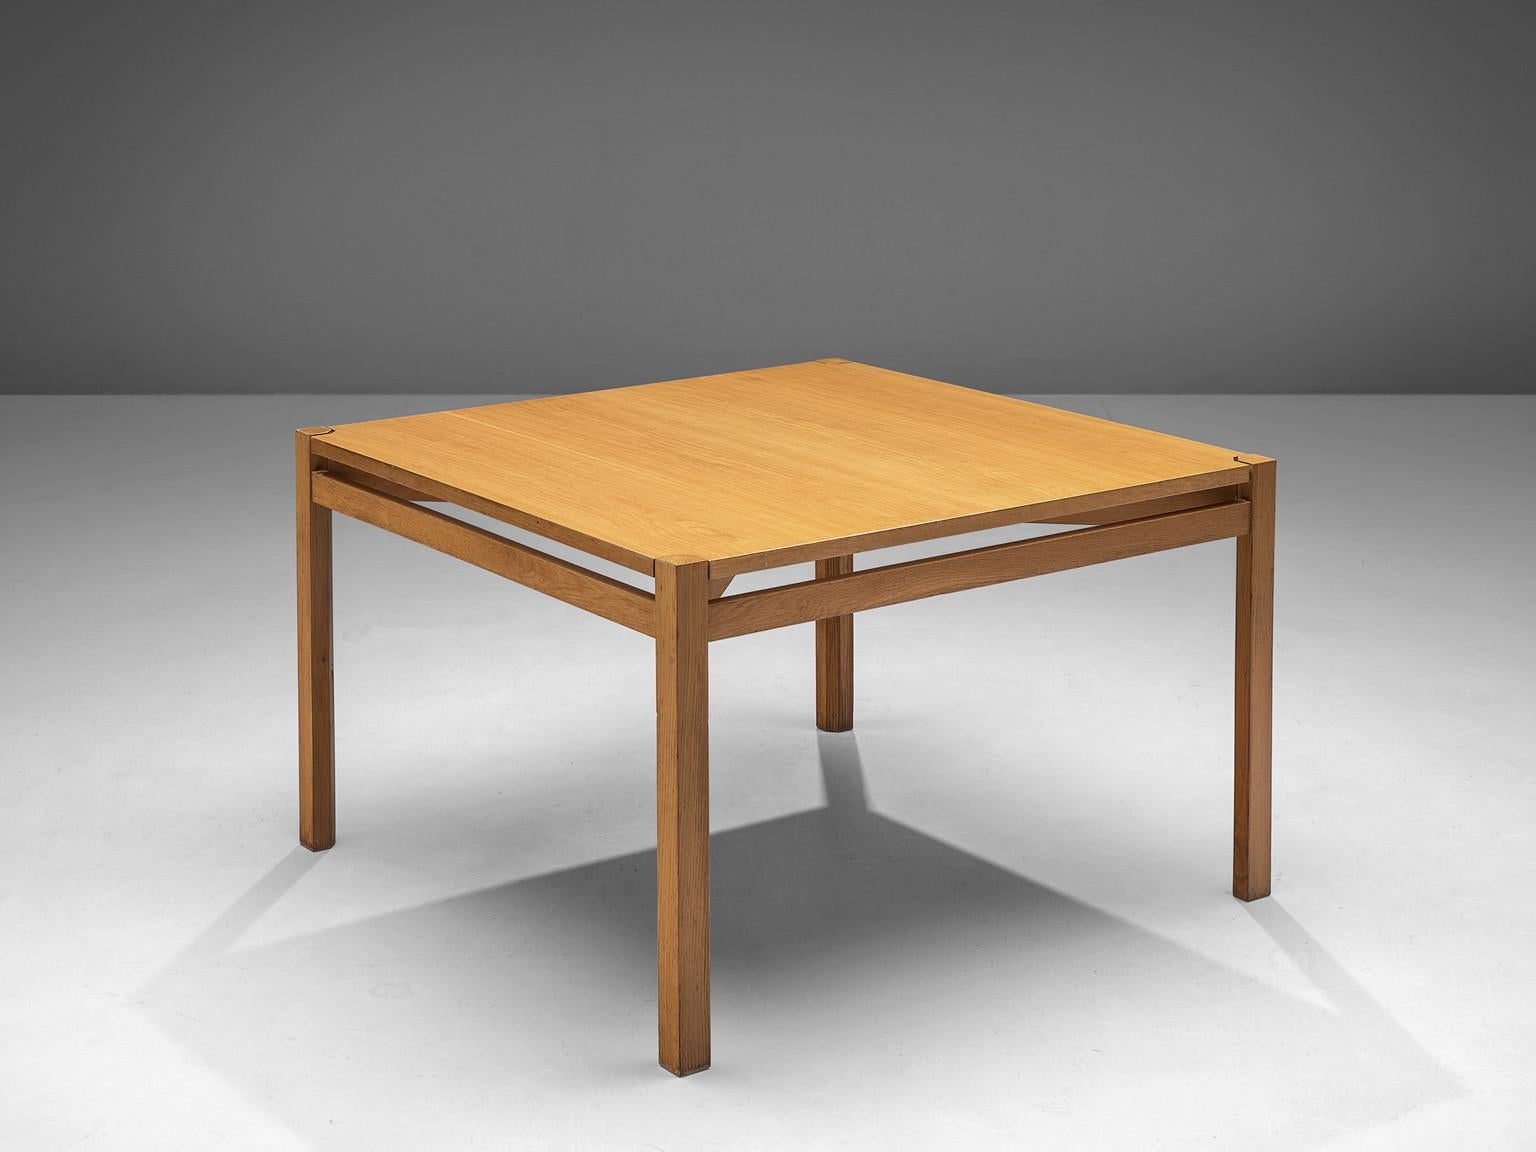 Jordi Casablanca Muntañola, dining table, oak, Spain, 1979. 

Catalan designer Jordi Casablanca Muntañola (1940-2001) designed this table in 1979. The dining table contains a square table top which stands on four angular legs that are connected with